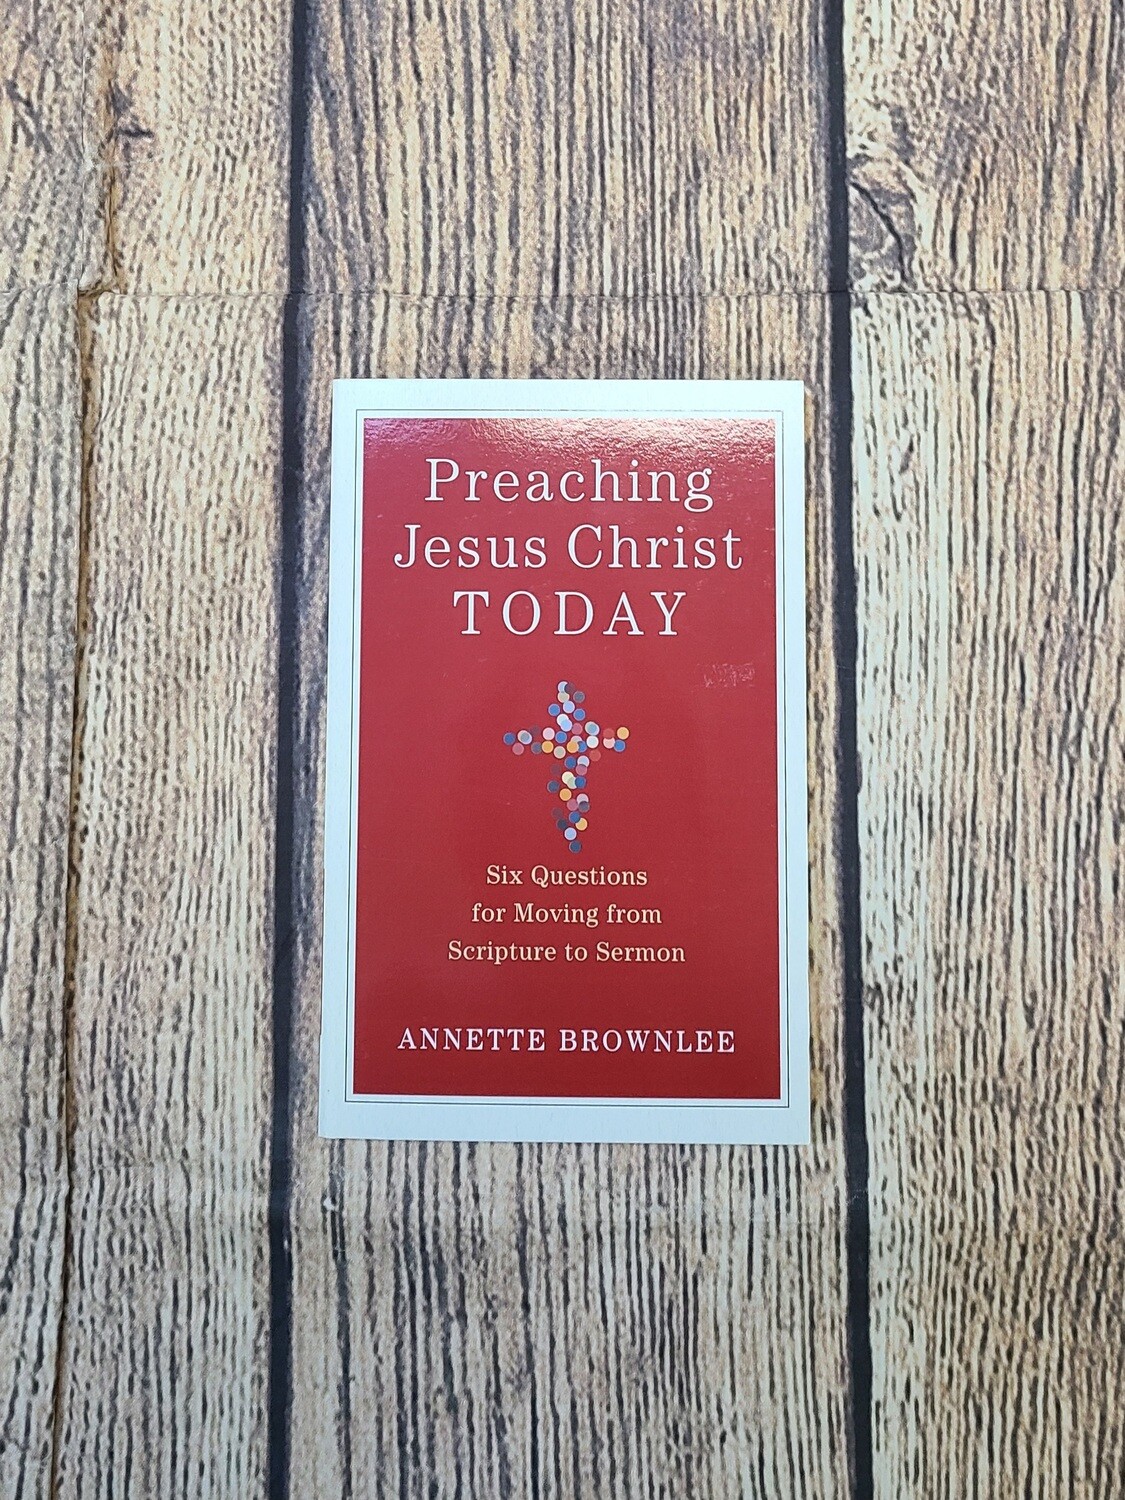 Preaching Jesus Christ Today: Six Questions for Moving from Scripture to Sermon by Annette Brownlee